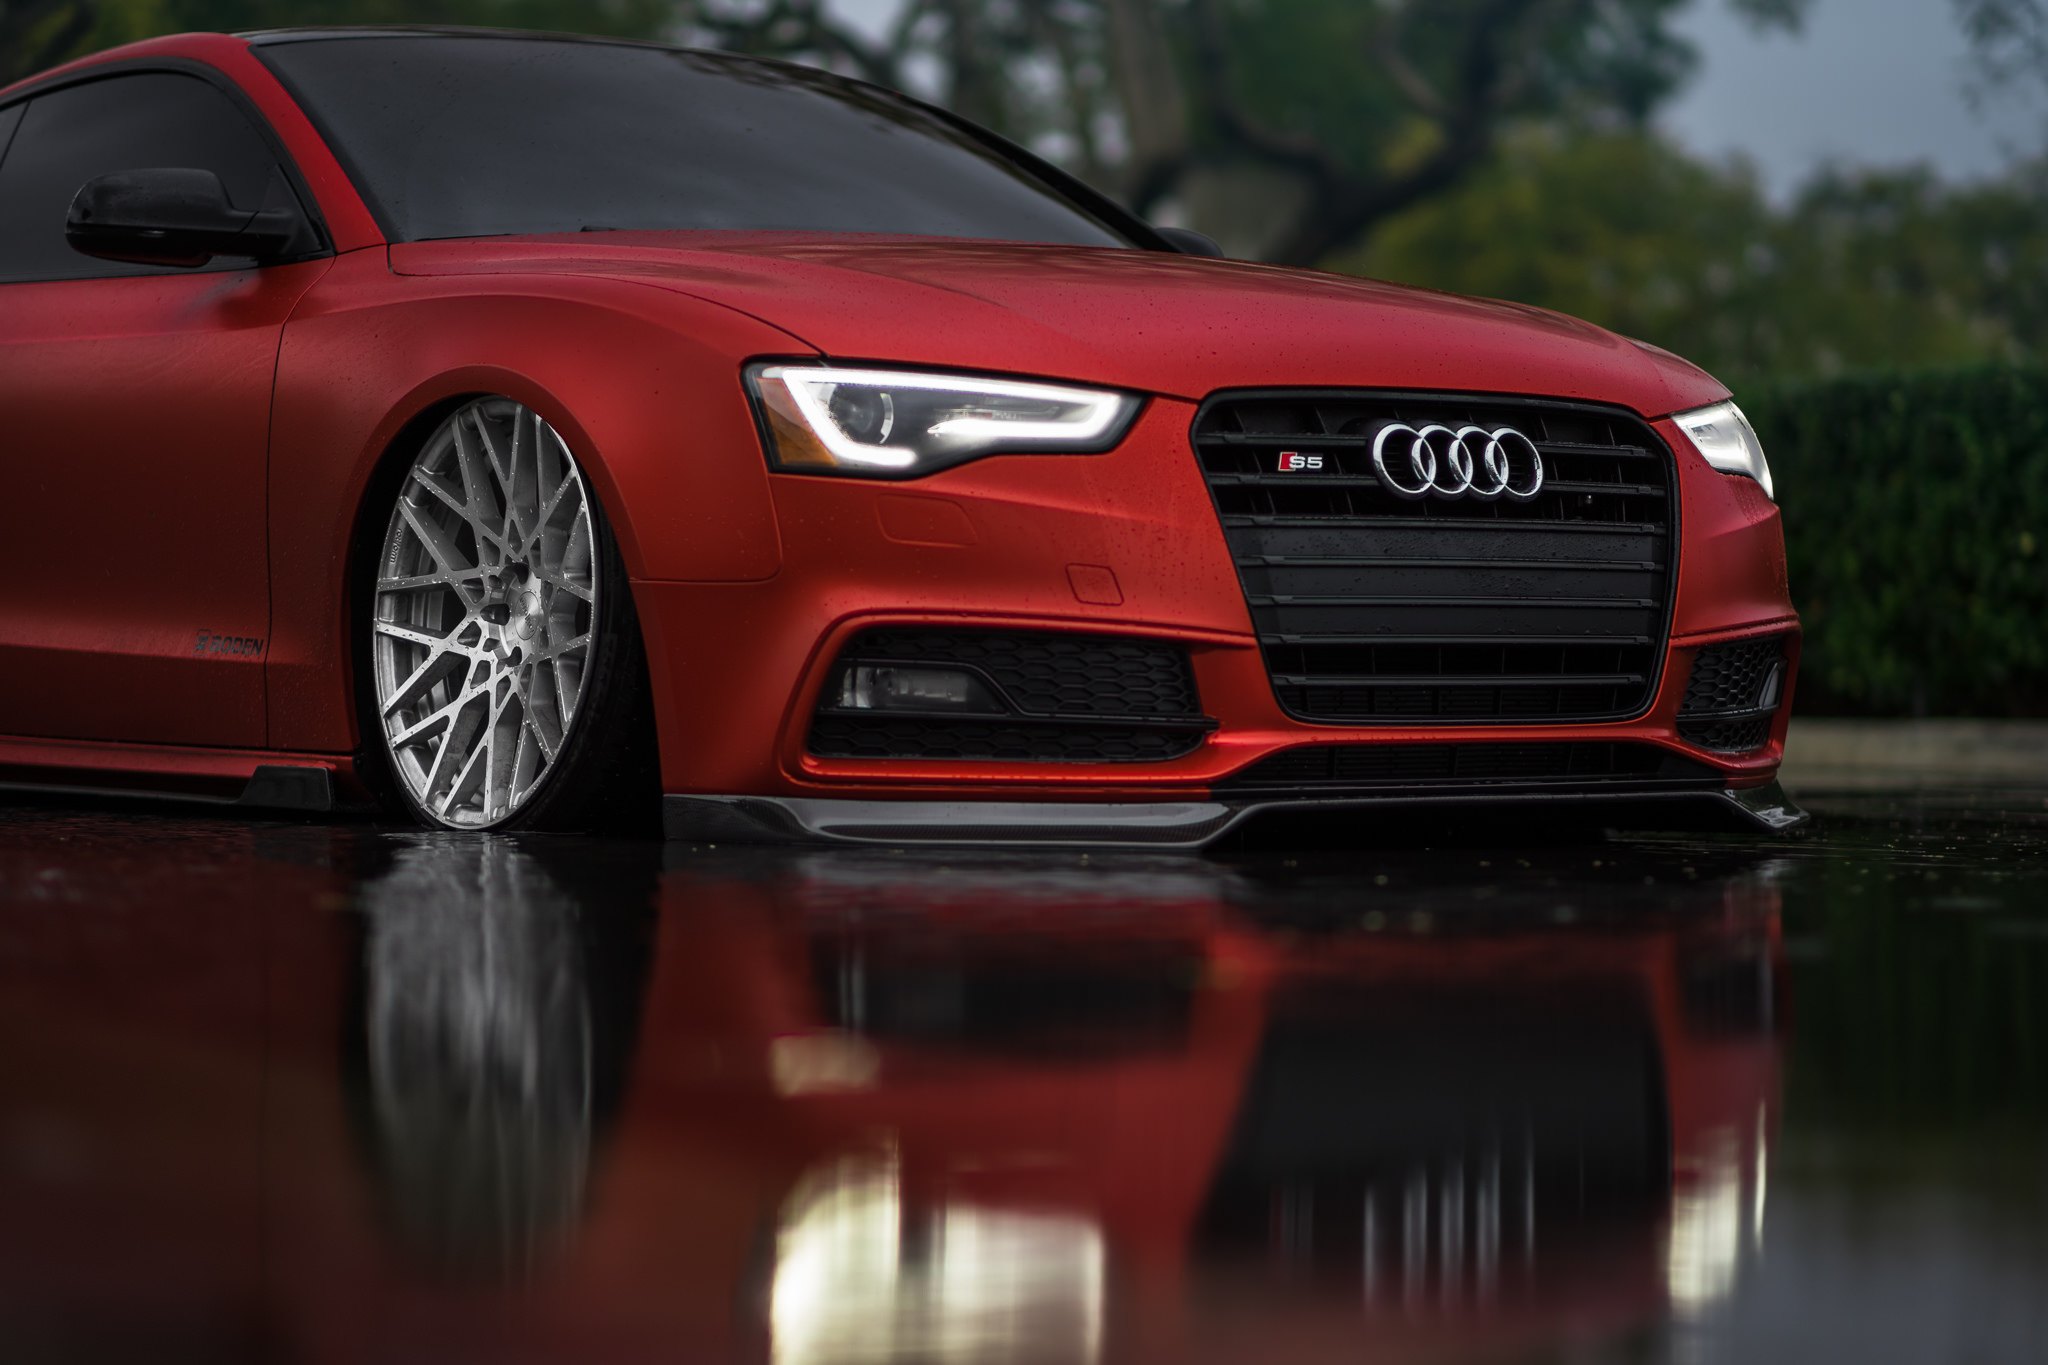 Chrome Rotiform Wheels on Red Audi S5 - Photo by Boden Autohaus